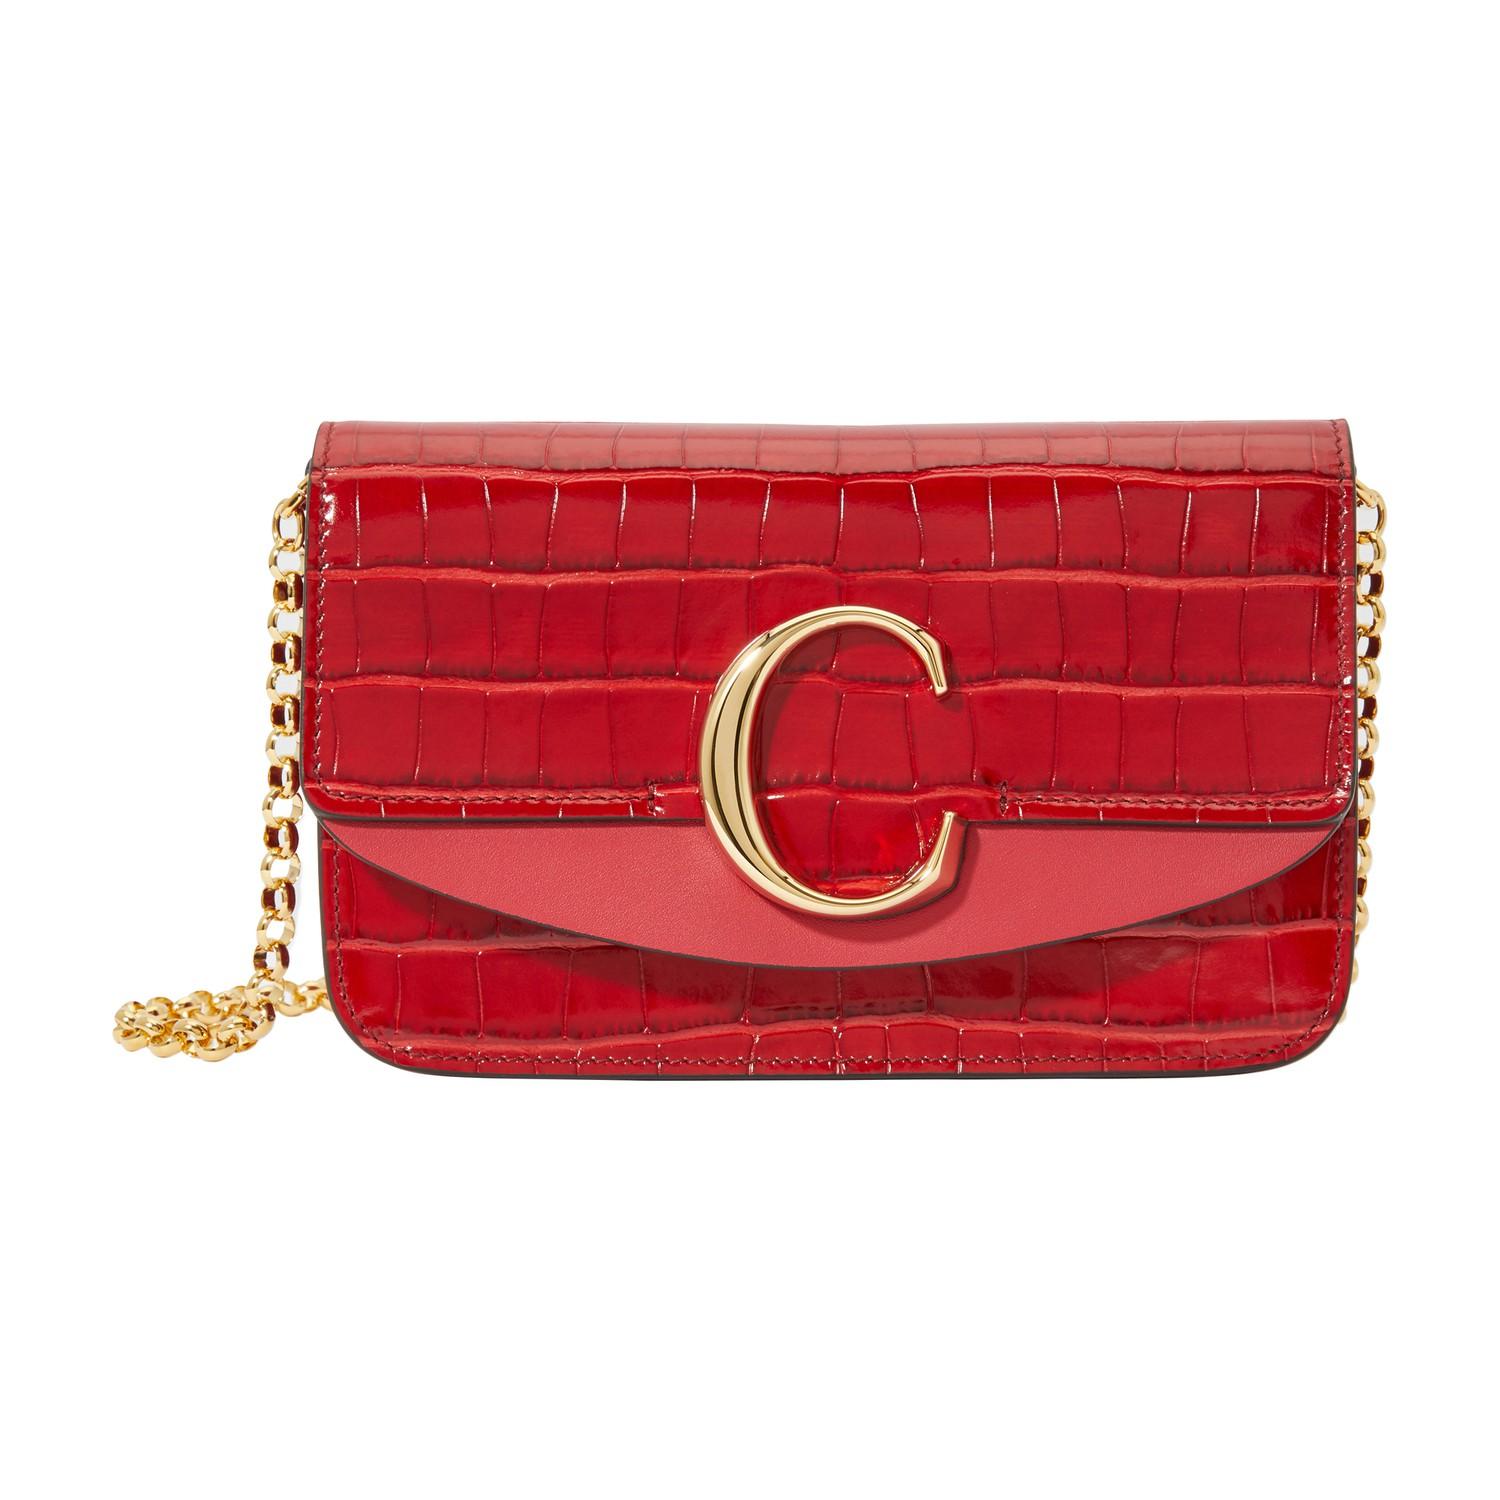 Chloé Leather C Crossbody Bag in Dusky Red (Red) - Lyst